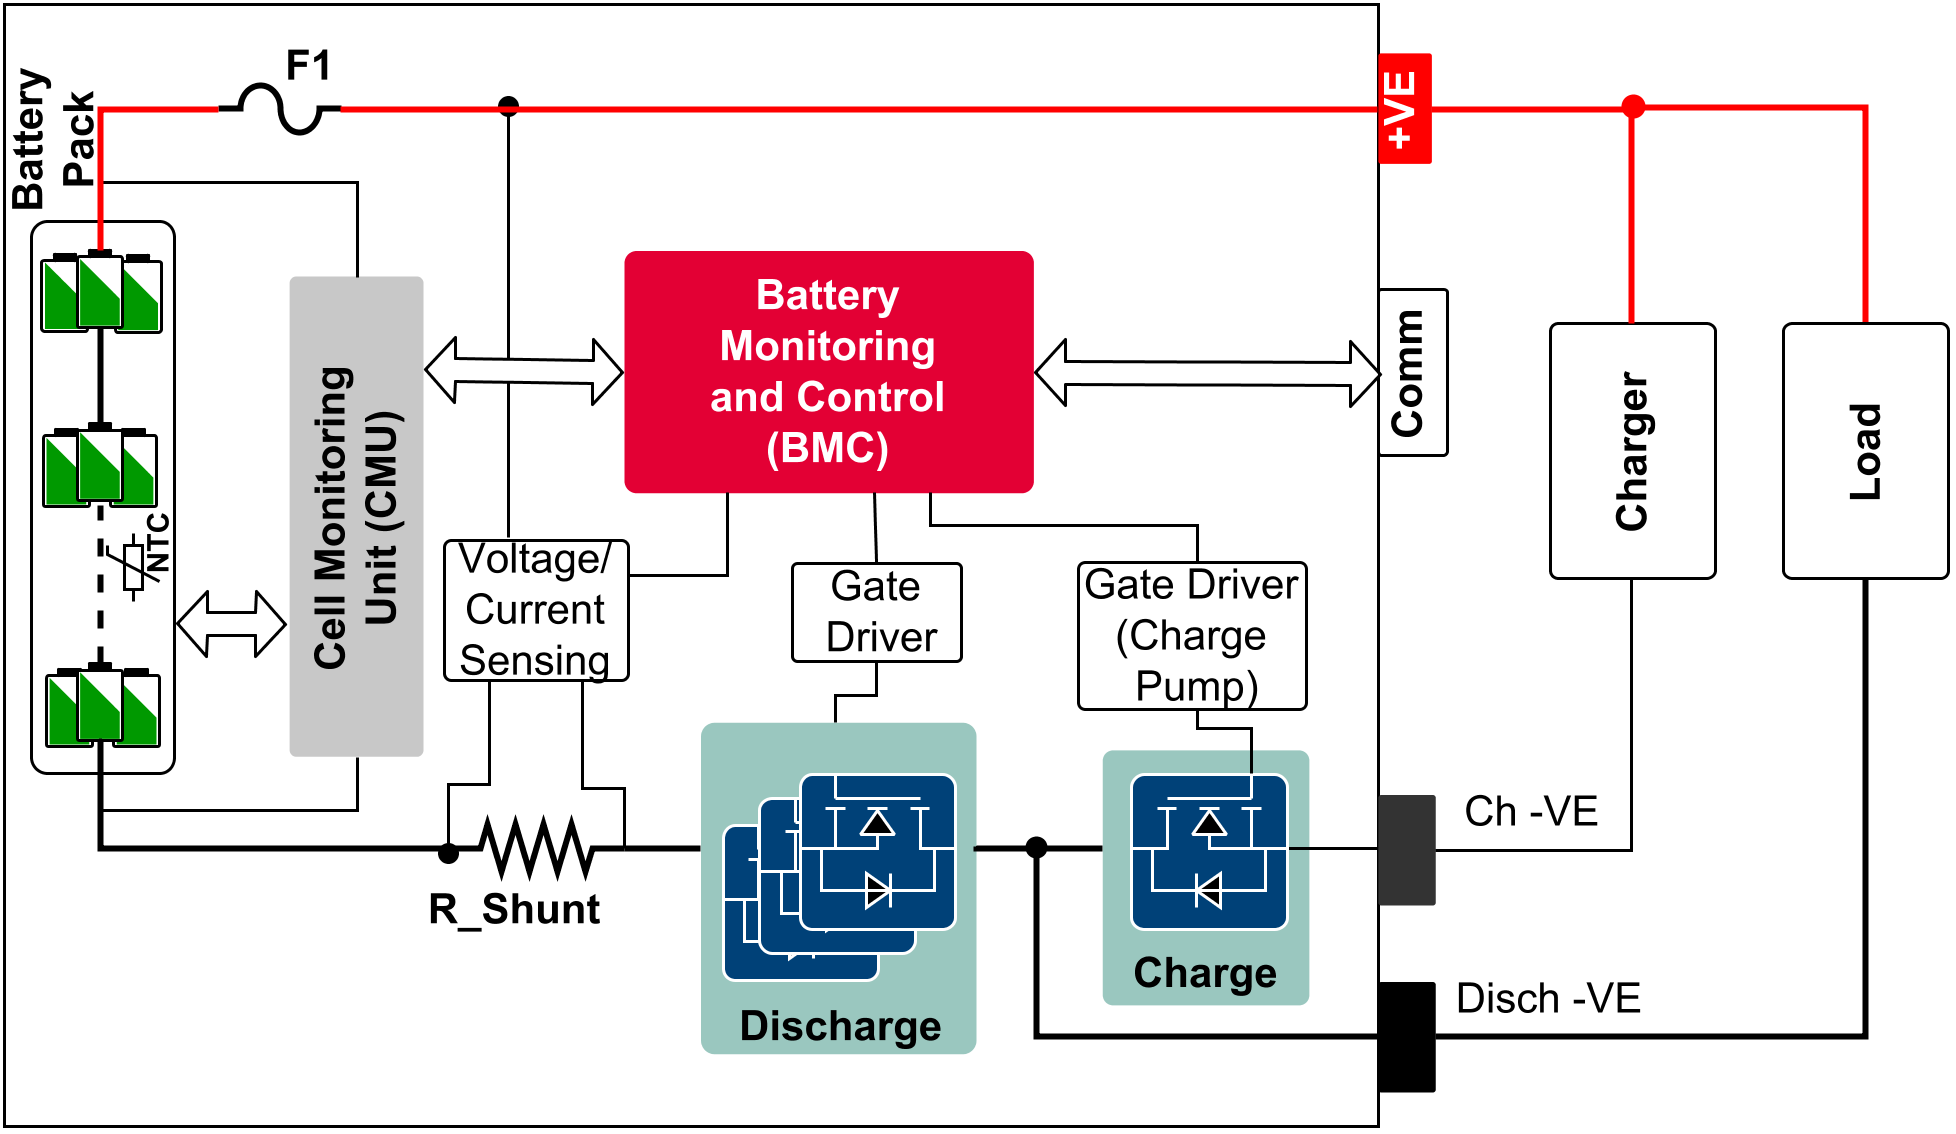 https://www.infineon.com/cms/_images/application/solutions/BMS-Separate-Charge-and-Discharge-Port-with-LS-Protection.PNG